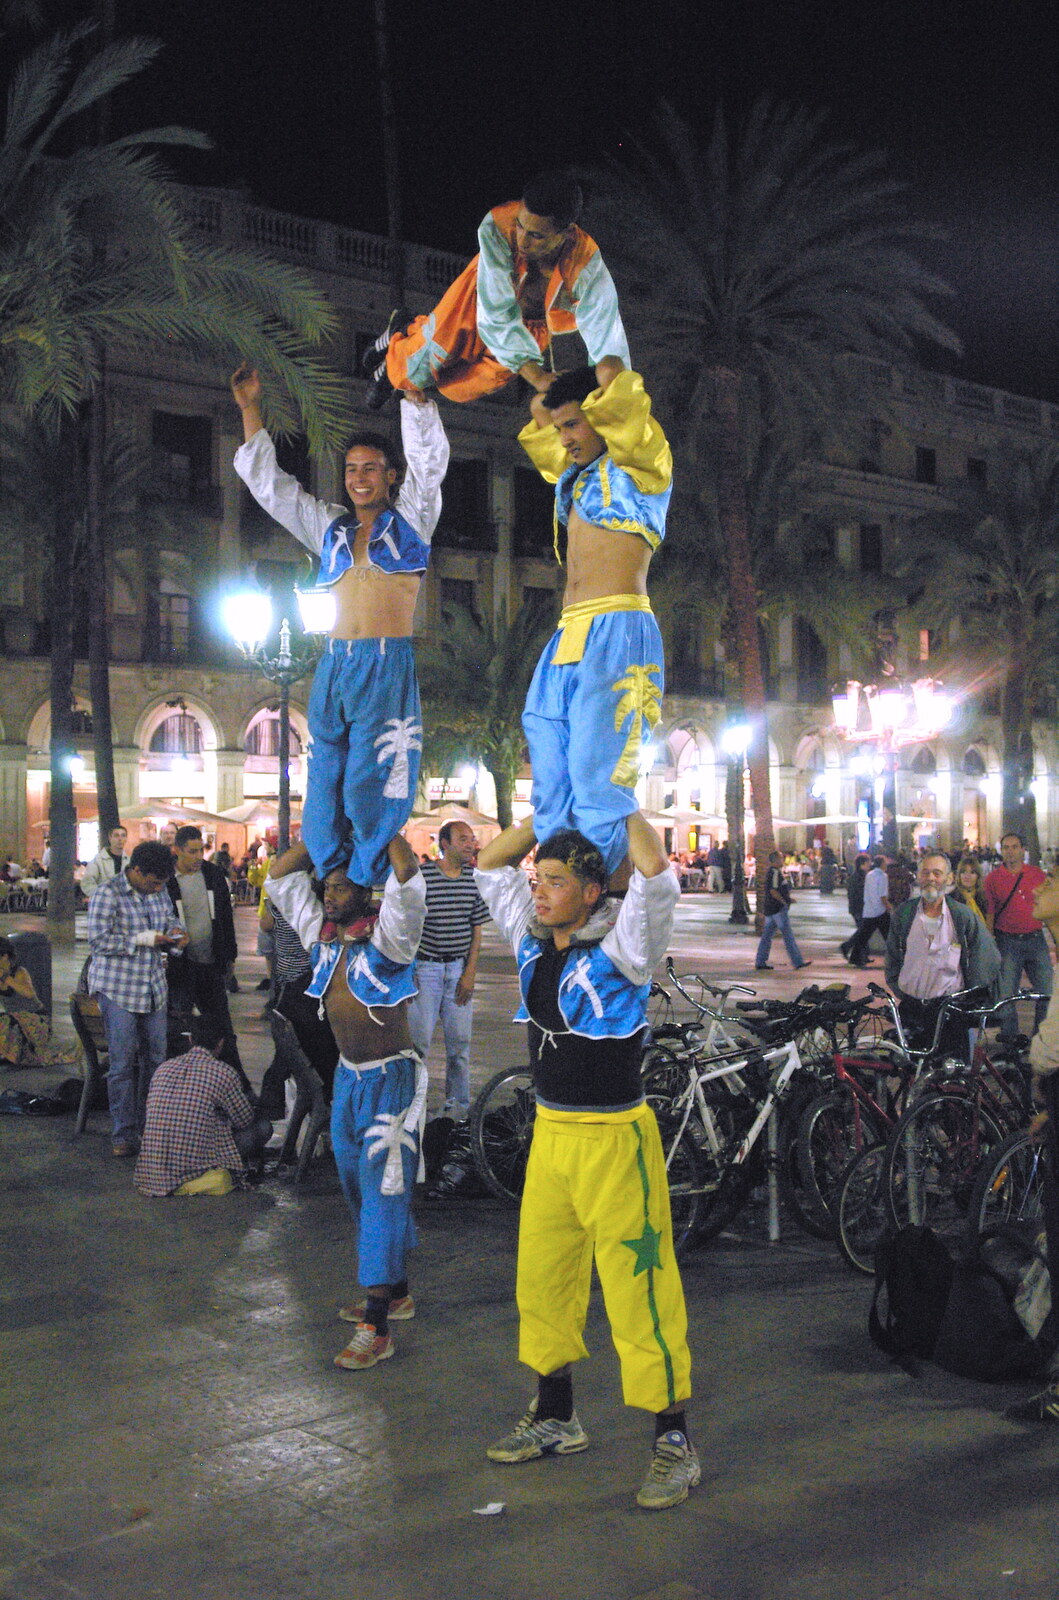 A human pyramid in Plaça Reia from A Trip to Barcelona, Catalunya, Spain - 29th April 2005